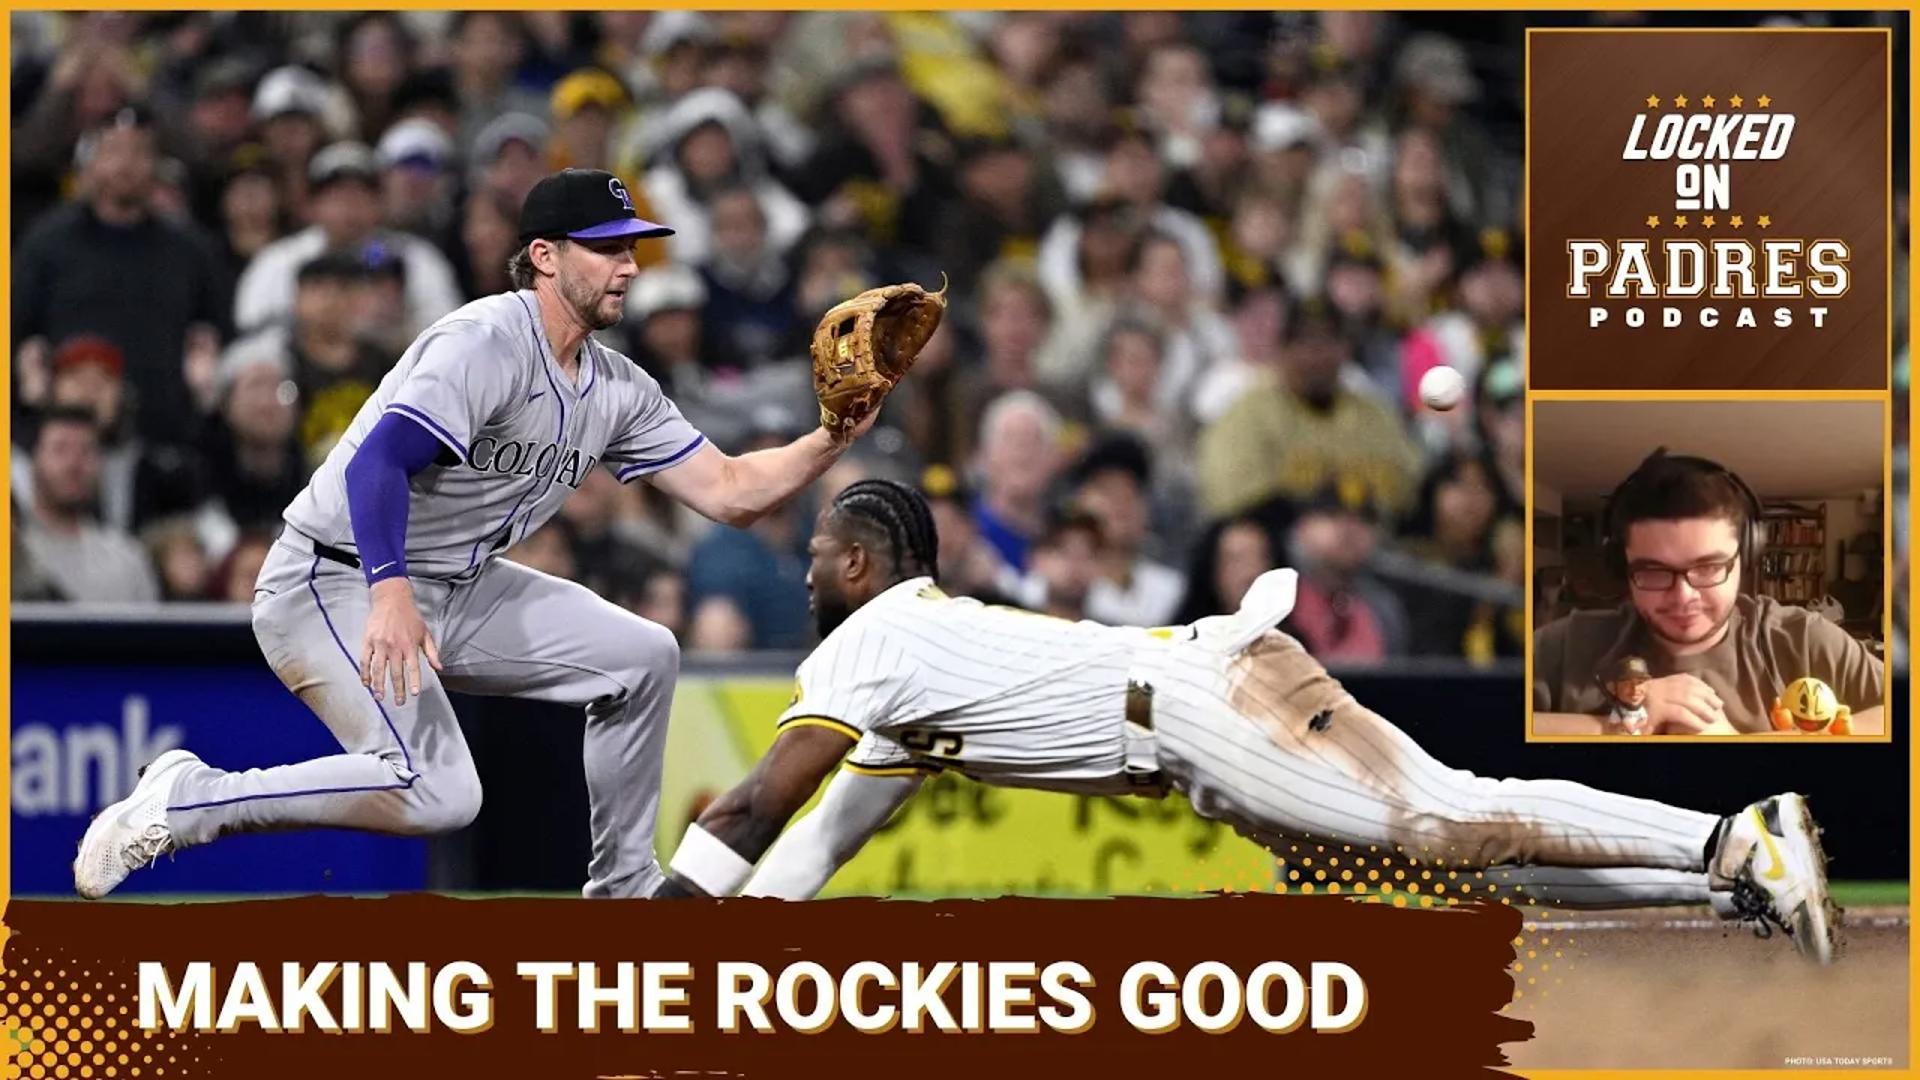 On today's episode, Javier is recaps the latest Padres disasterclass in the form of ANOTHER loss to the lowly Rockies.